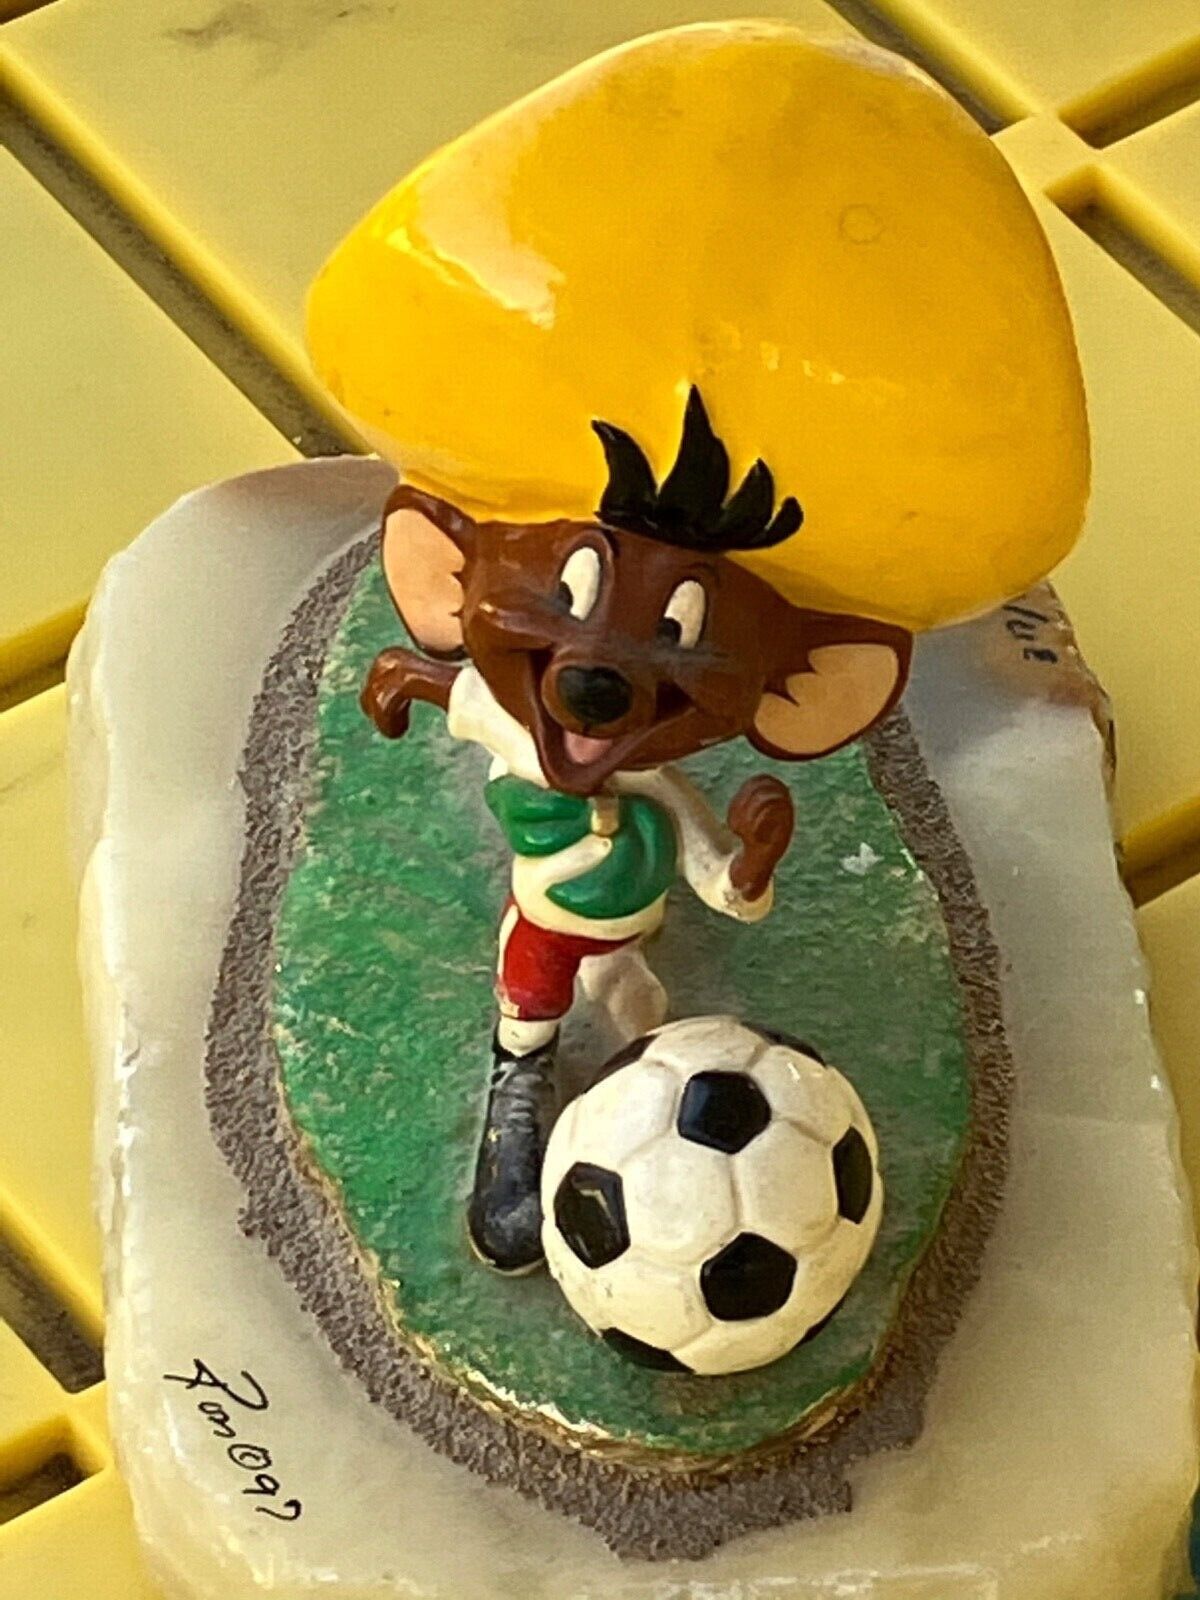 Rare Autographed Ron lee Sculpture pre-owned speedy Gonzalez with soccer ball.